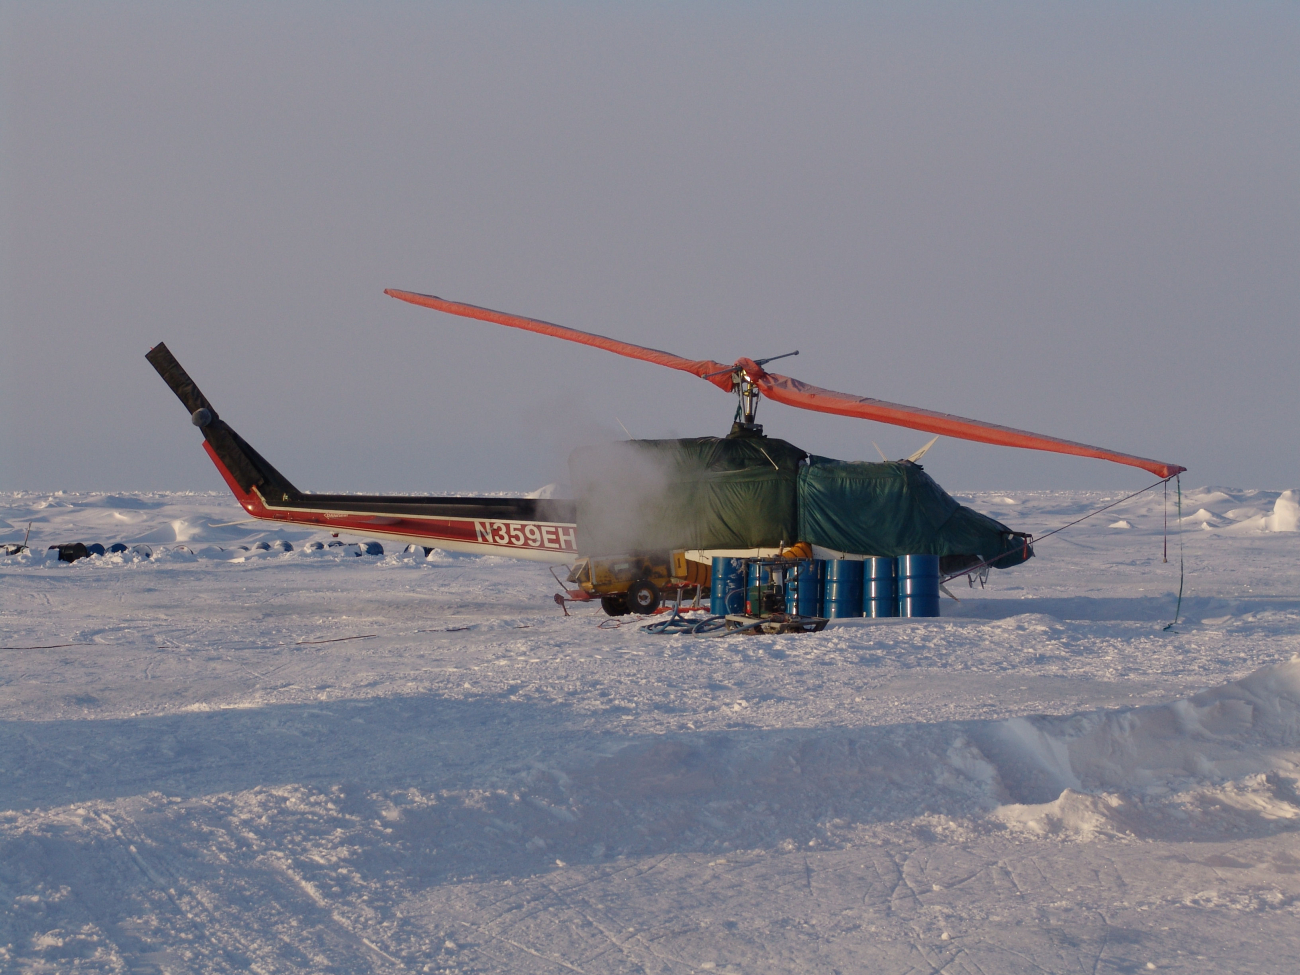 Helicopter transportation for studies of ice in vicinity of ice camp